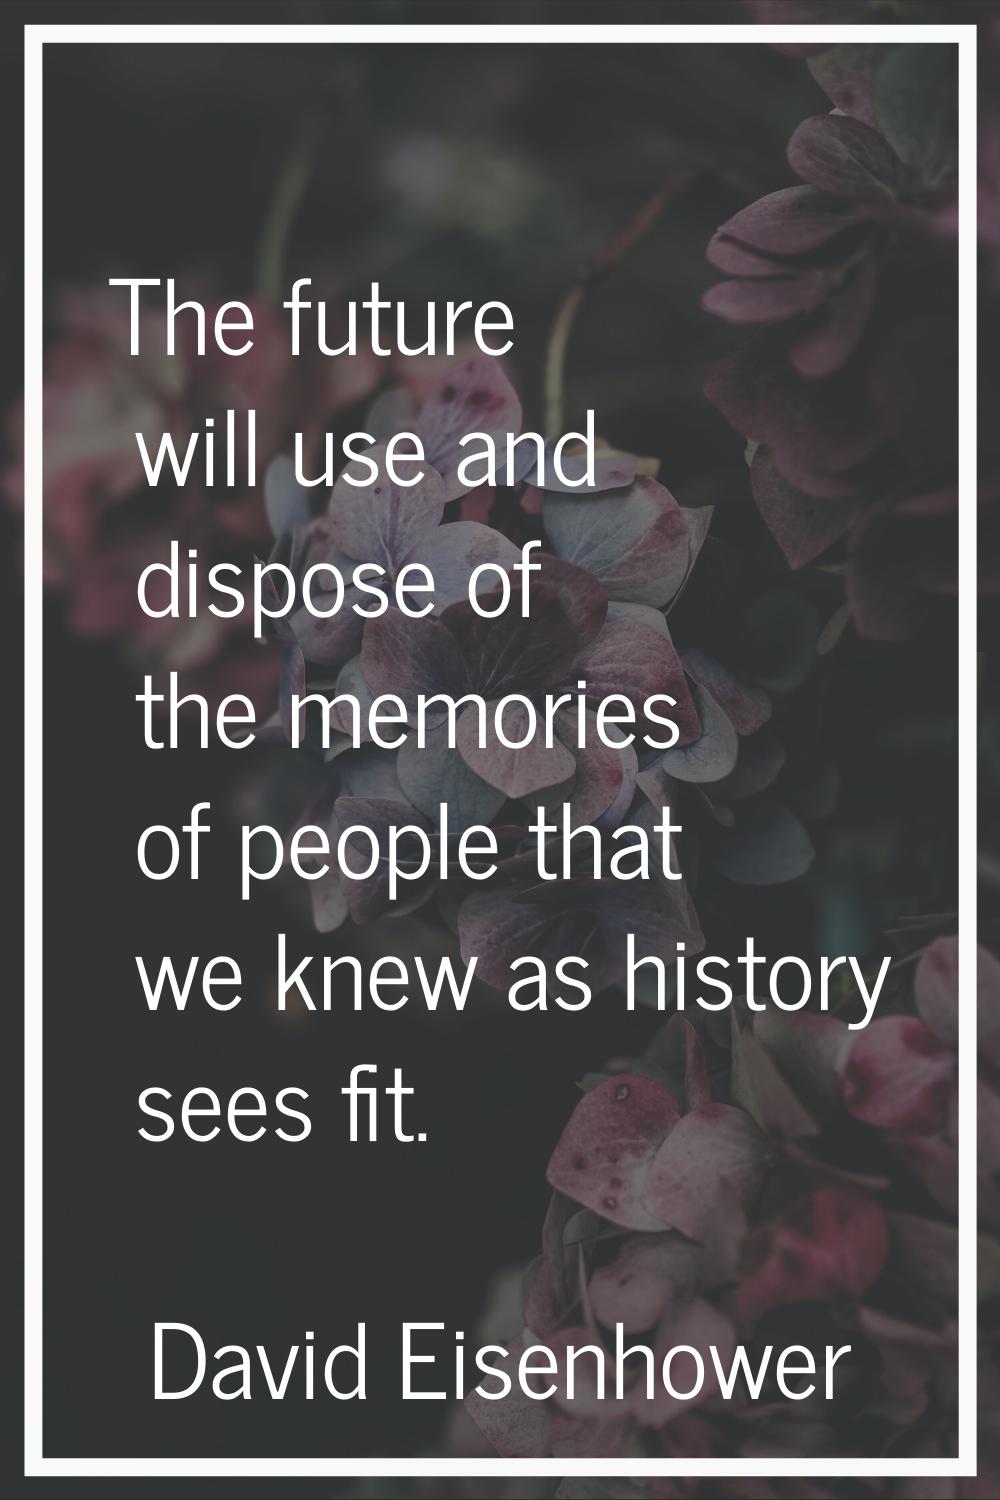 The future will use and dispose of the memories of people that we knew as history sees fit.